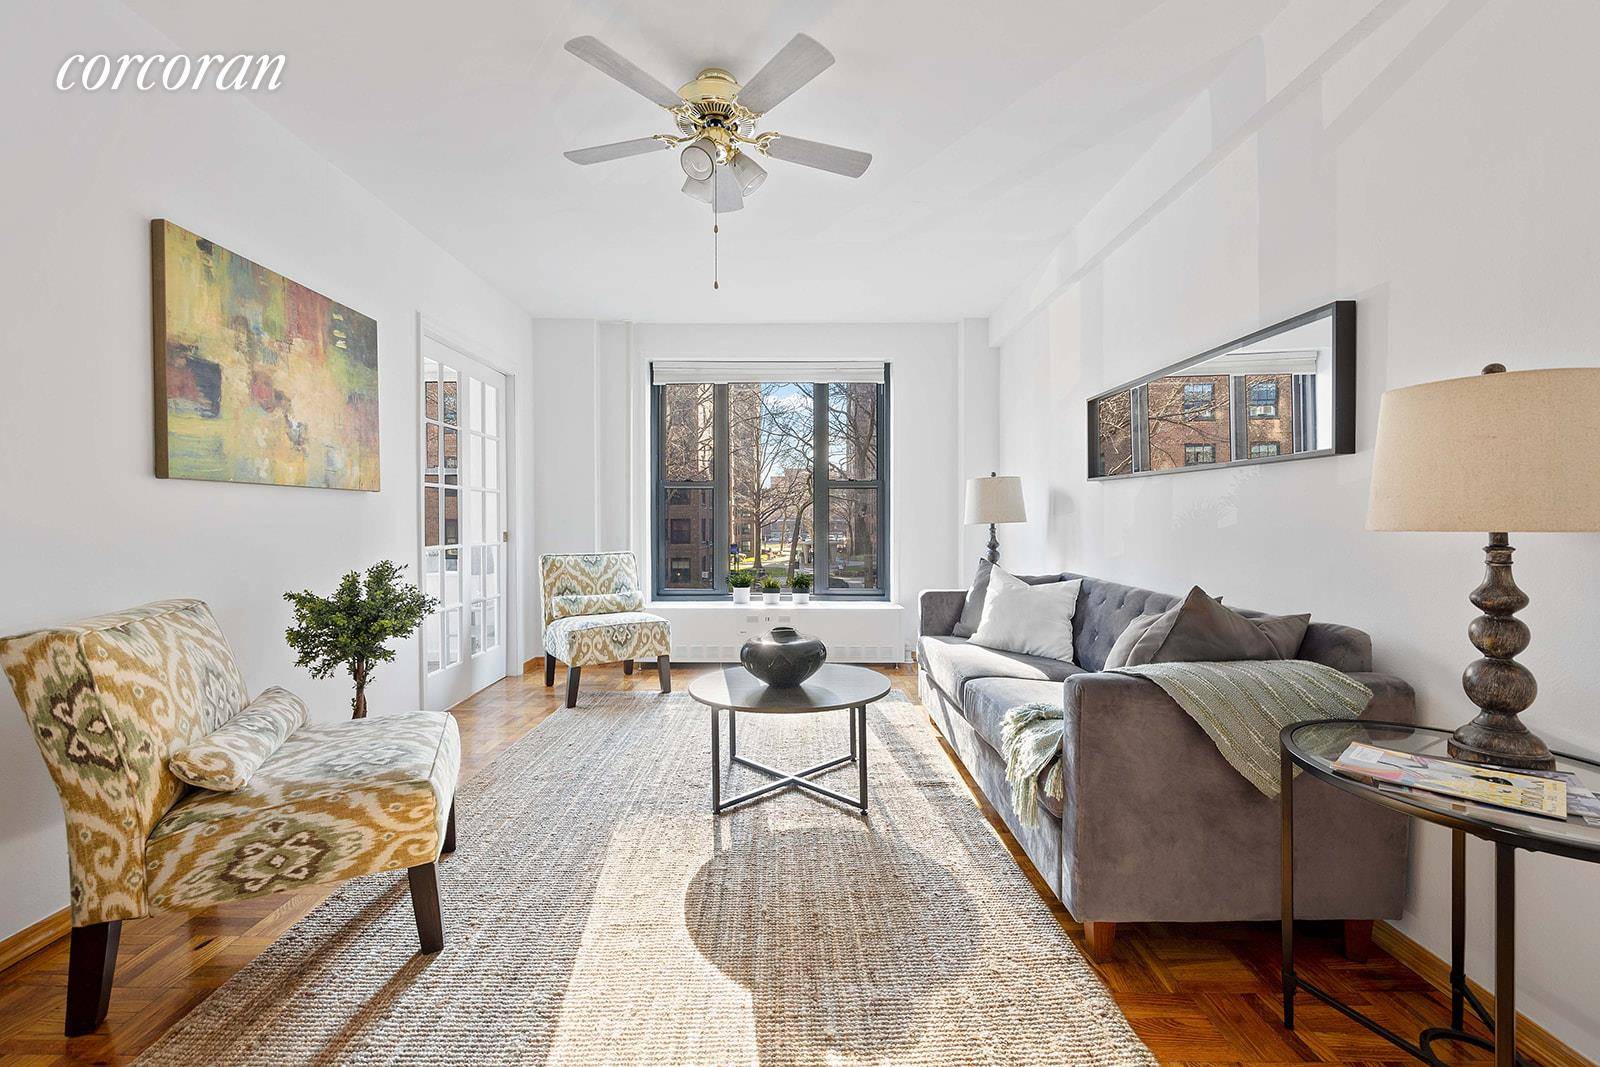 Lovely and Light ! 325 Clinton Ave, unit 2D, in the CLINTON COOPS is a spacious and well laid out, one and a half bedroom, with OVERSIZED windows offering light ...